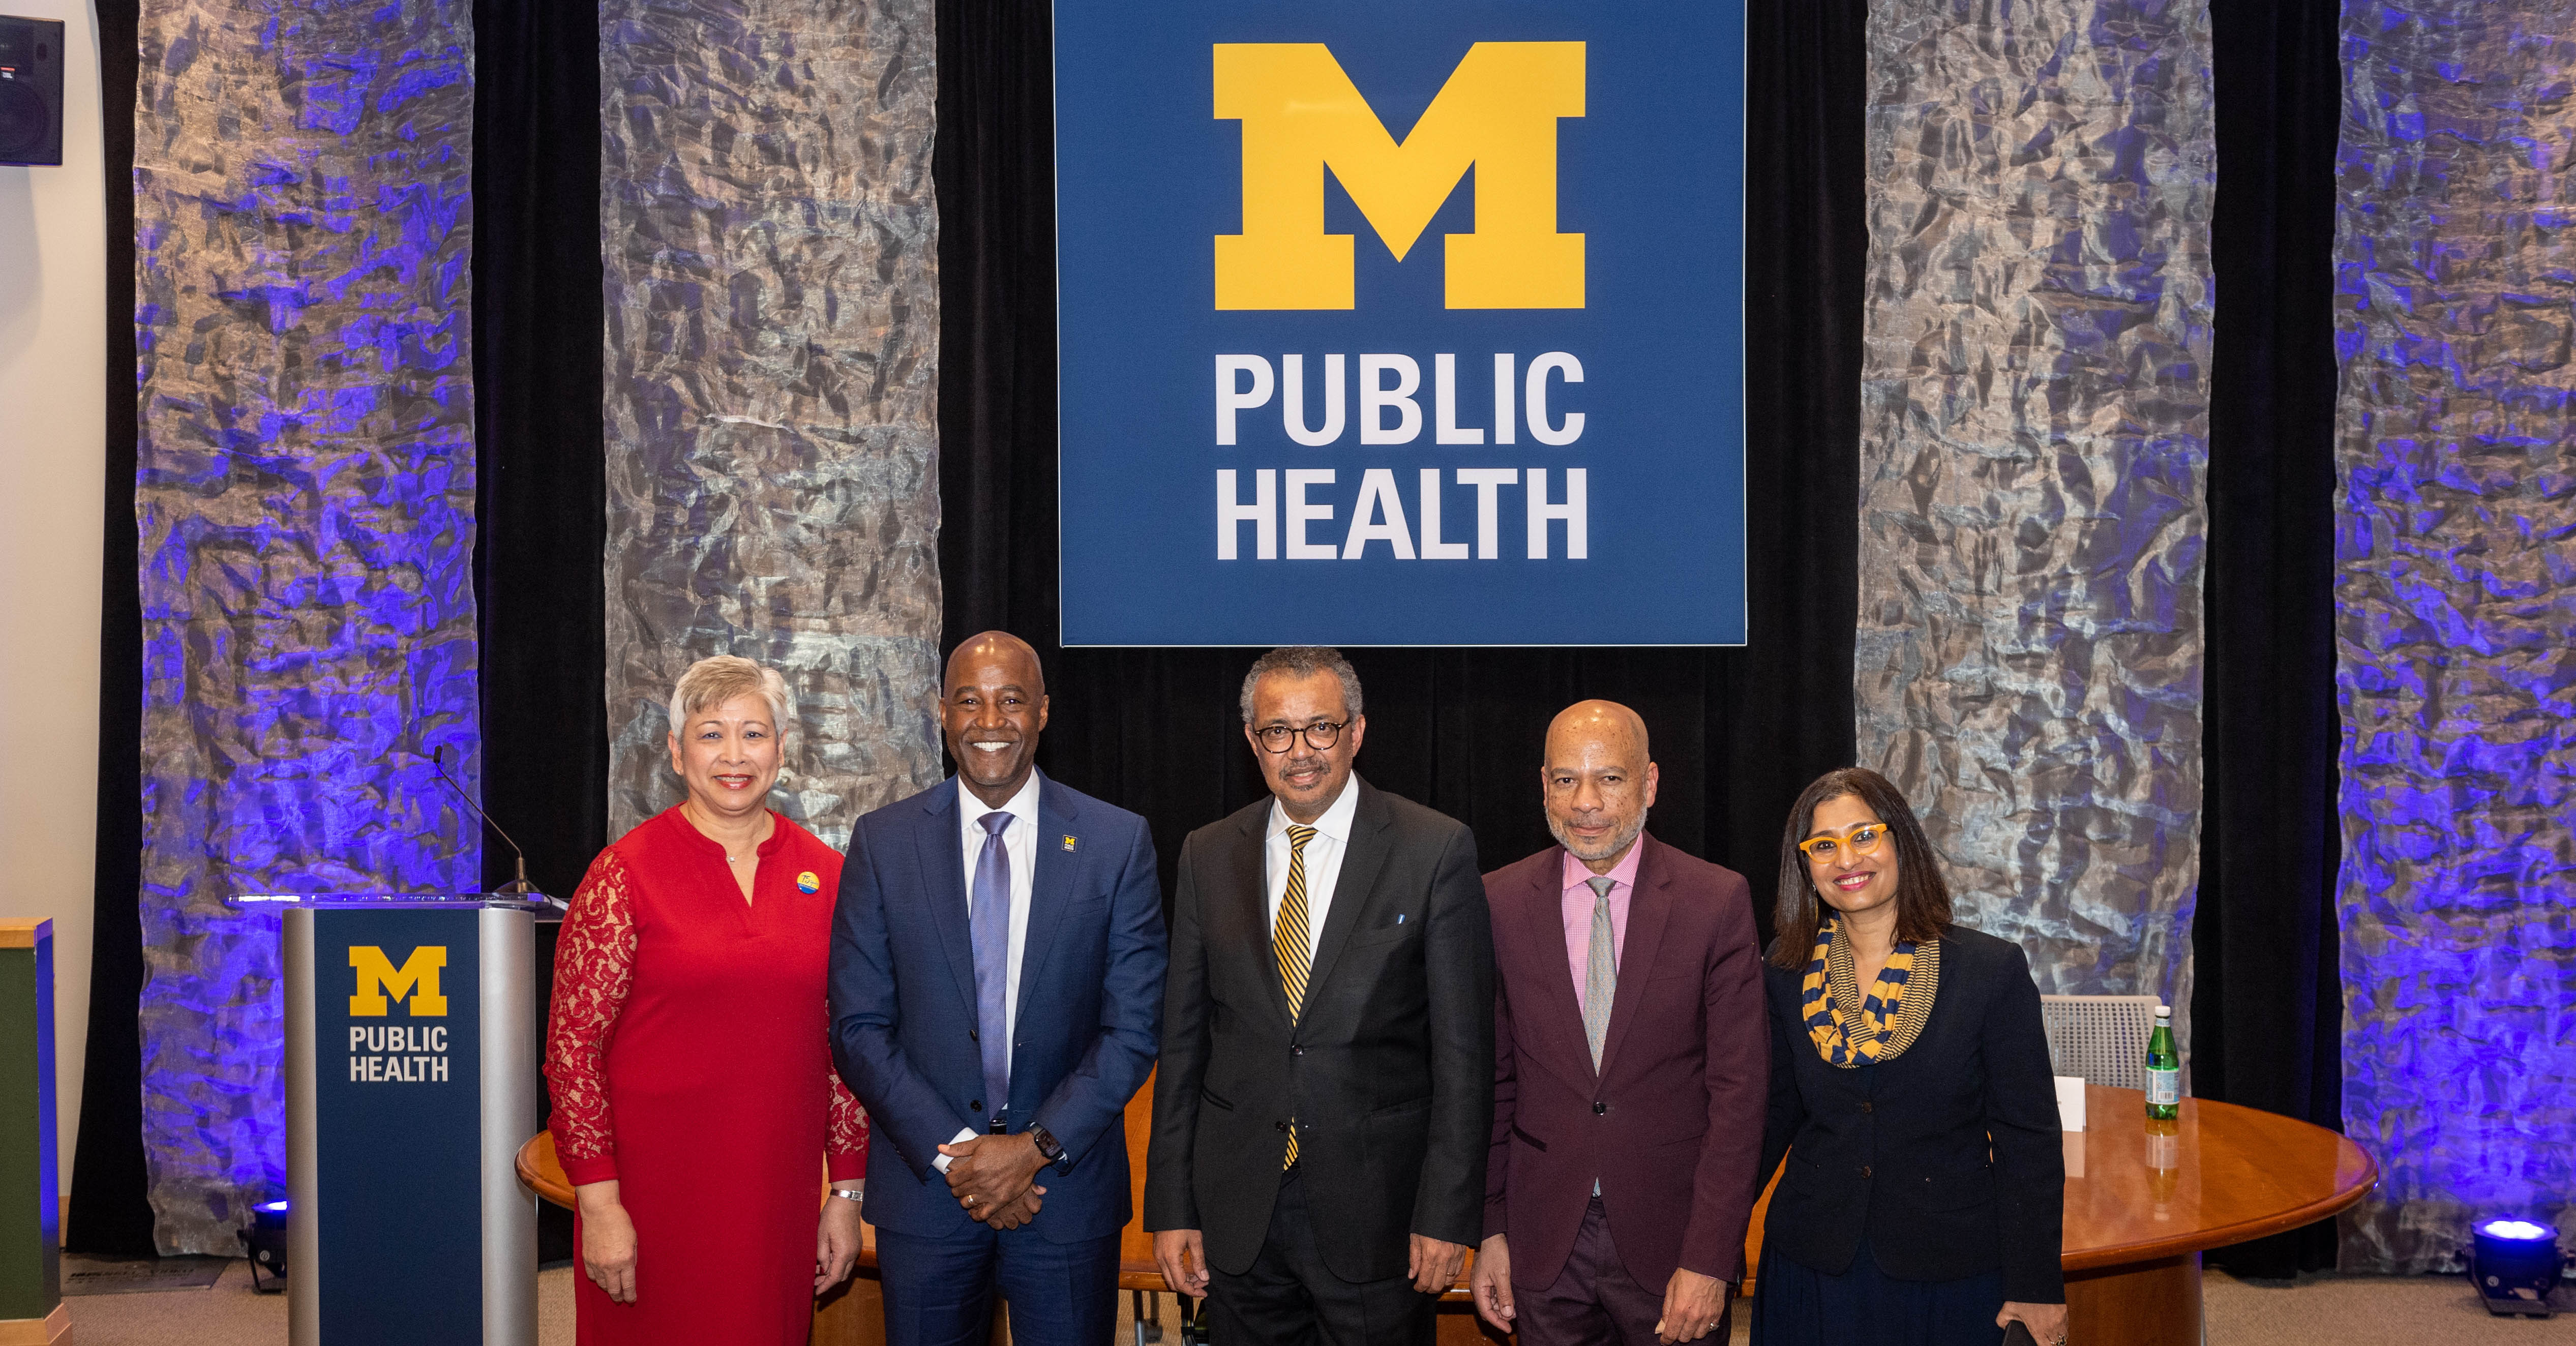 Dr. Tedros Adhanom Ghebreyesus, Director-General of the World Health Organization, stands with public health researchers after a conversation on global public health.